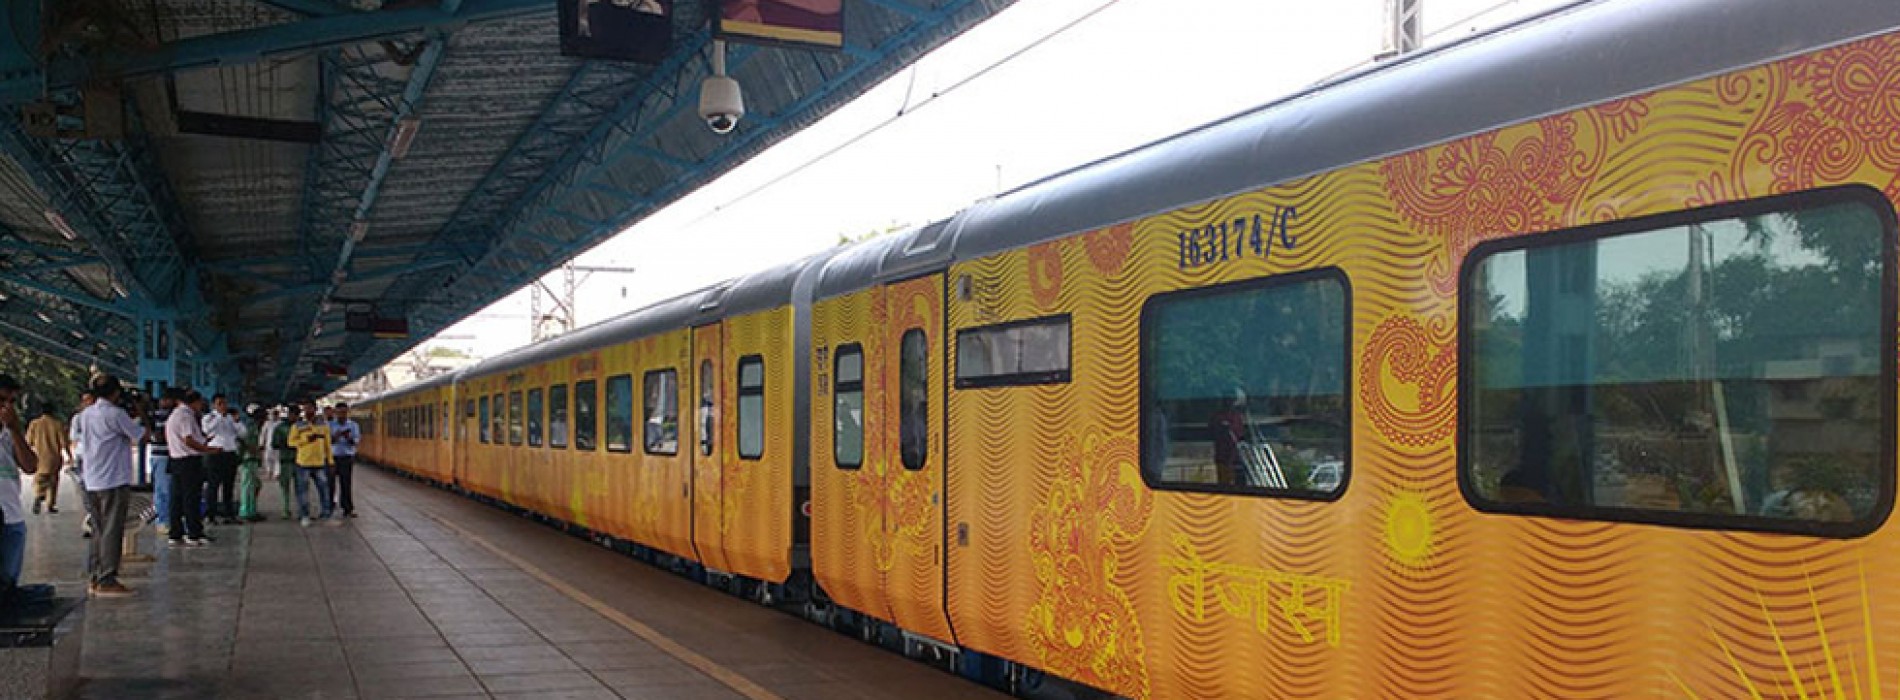 Travel from New Delhi to Chandigarh through Tejas Express now